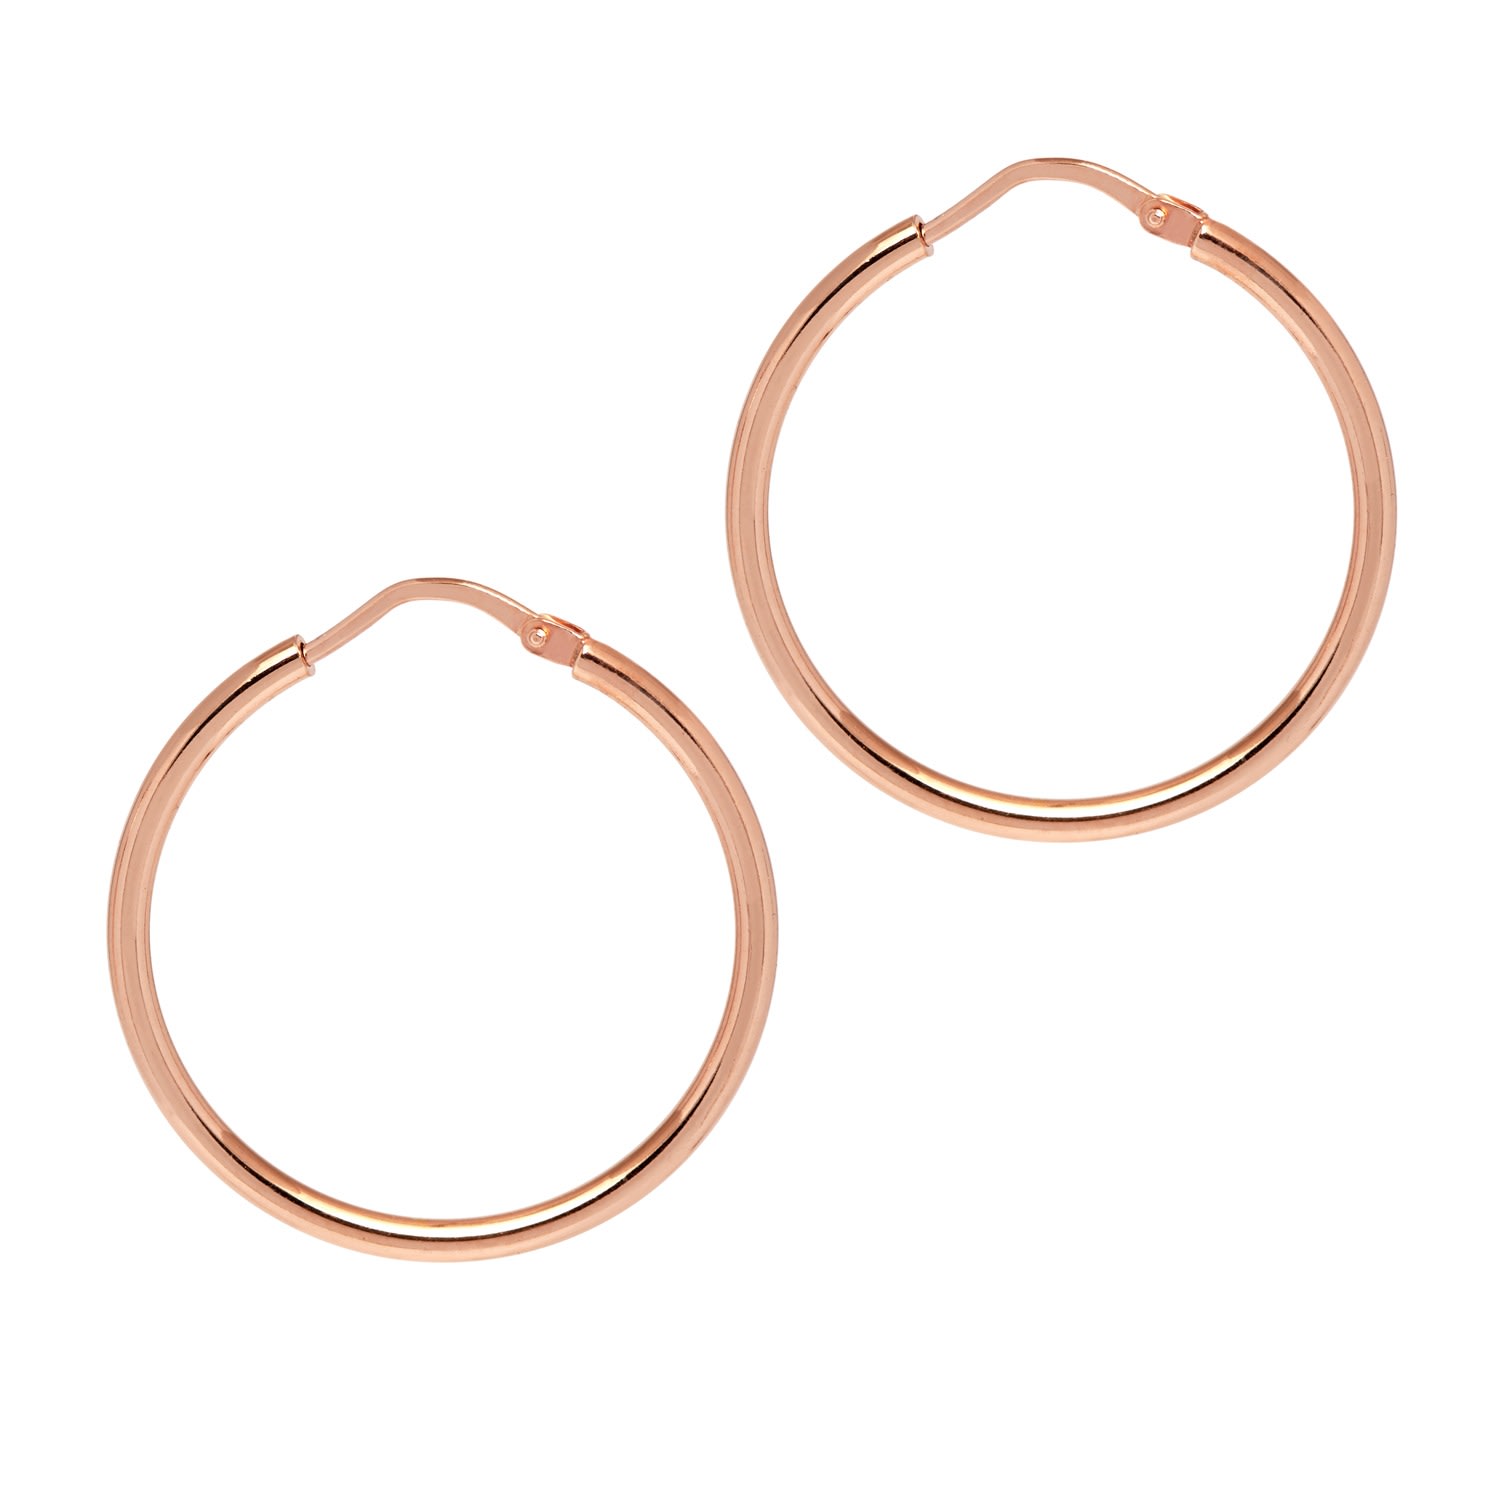 The Hoop Station Women's Rose Gold Skinny Thin Extra Small Rosegold